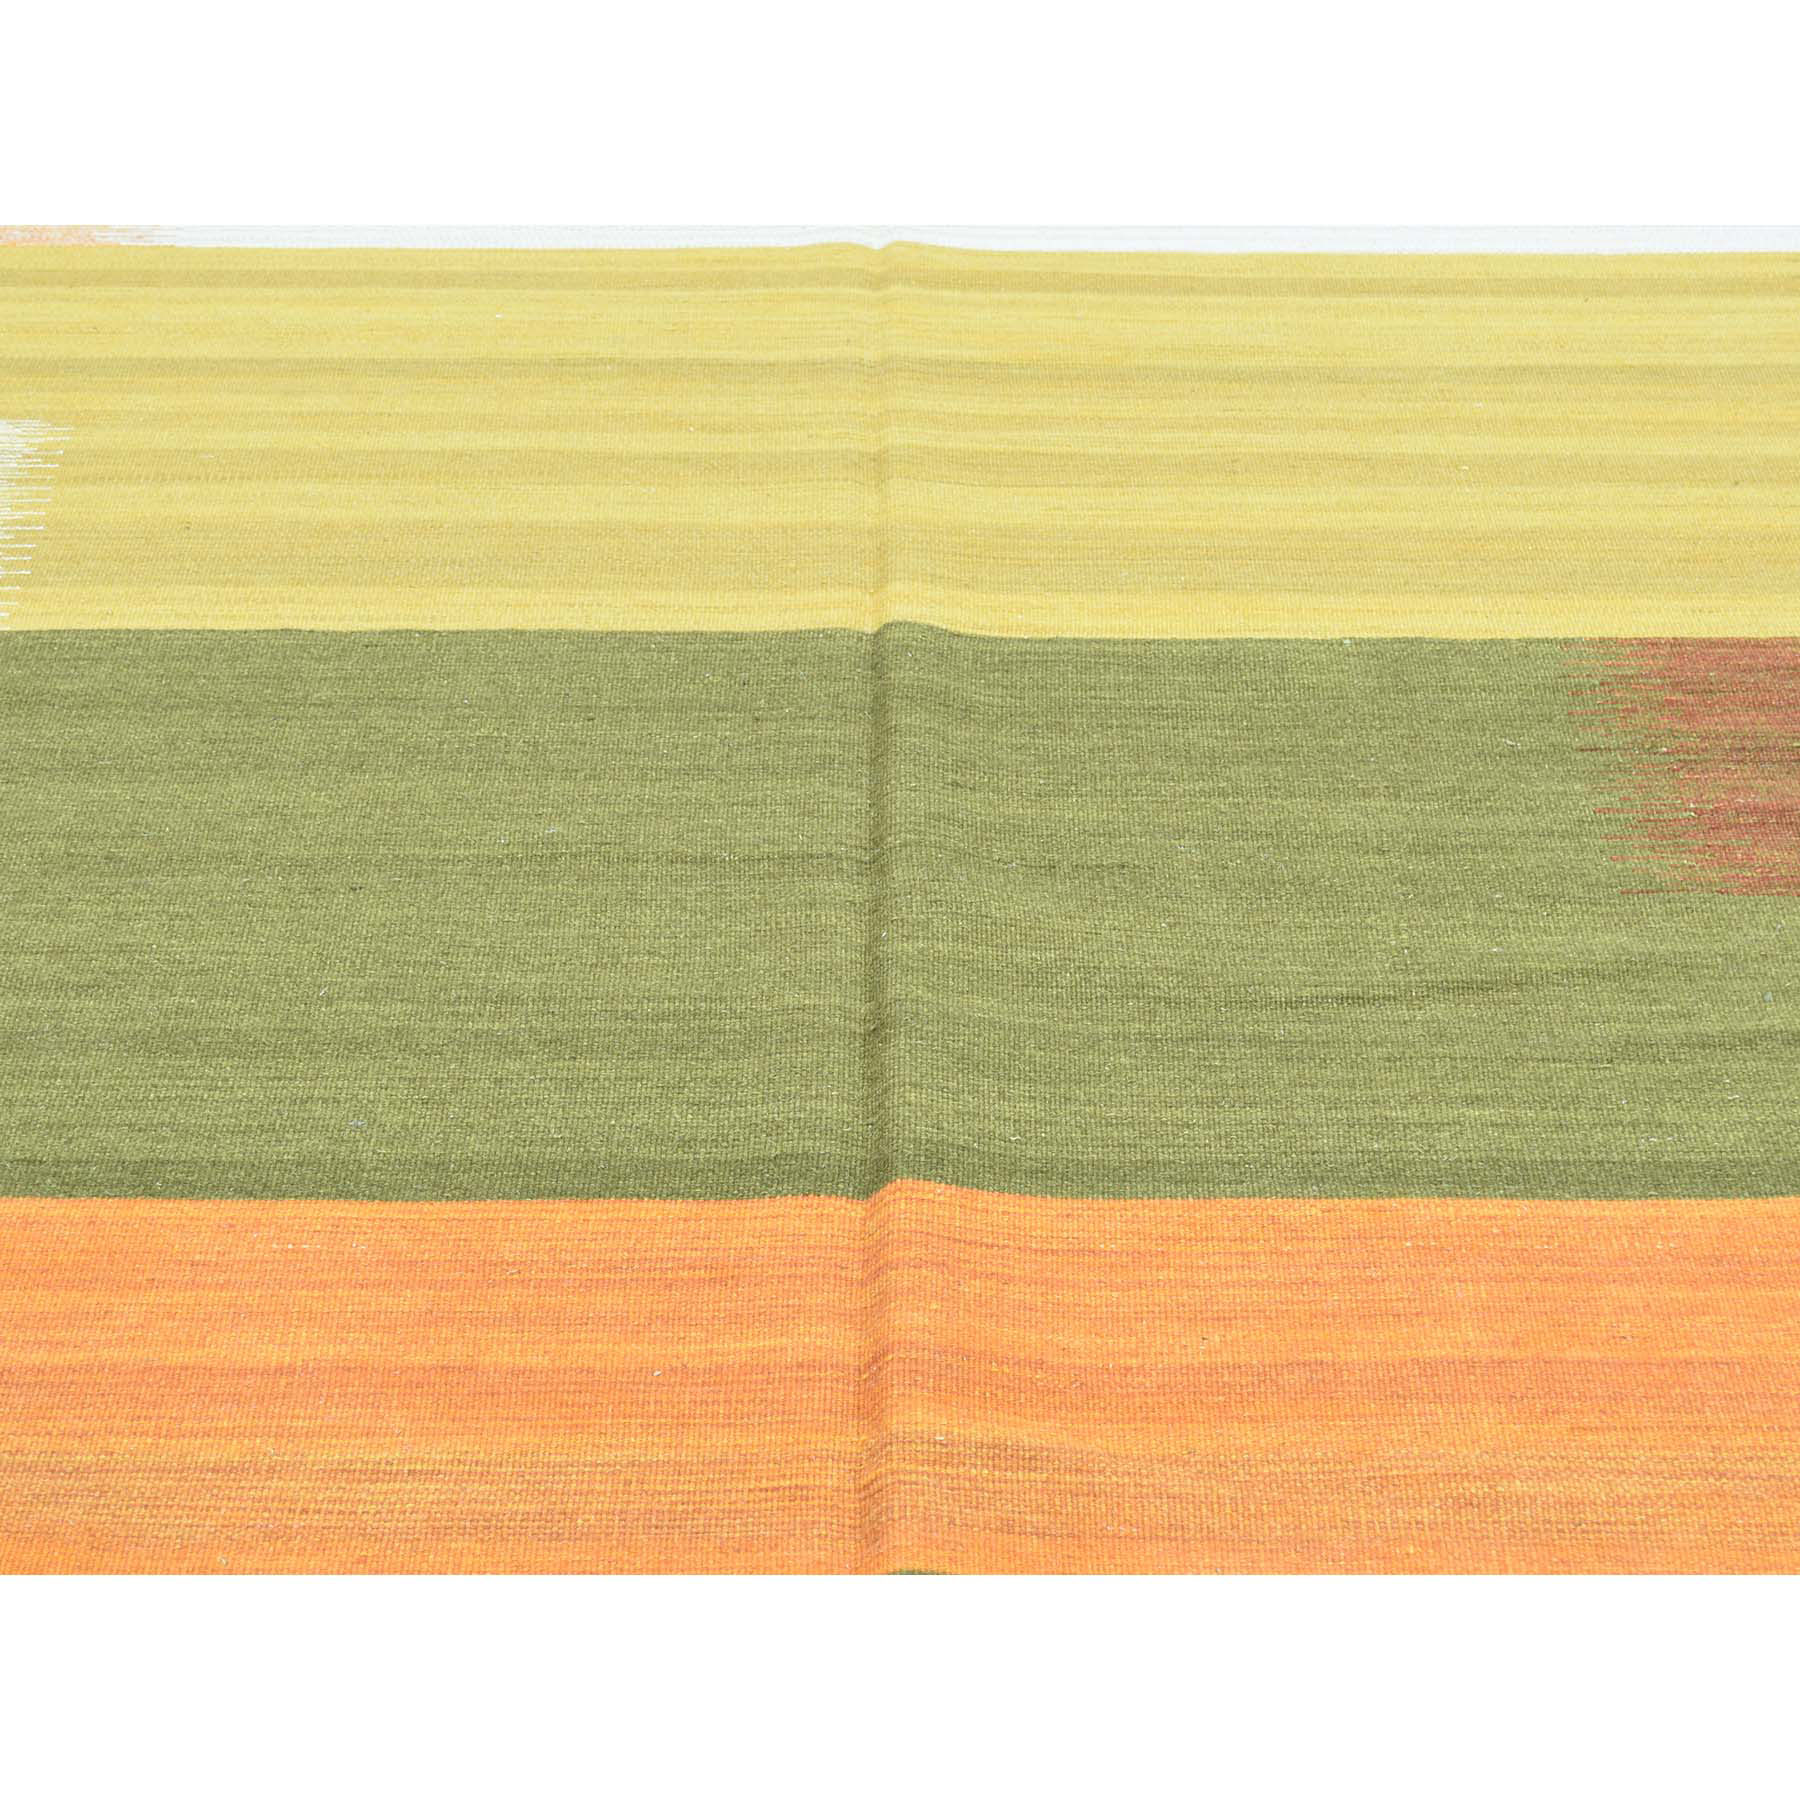 10'x14'3" Hand-Woven Flat Weave Colorful Durie Kilim Pure Wool Carpet 